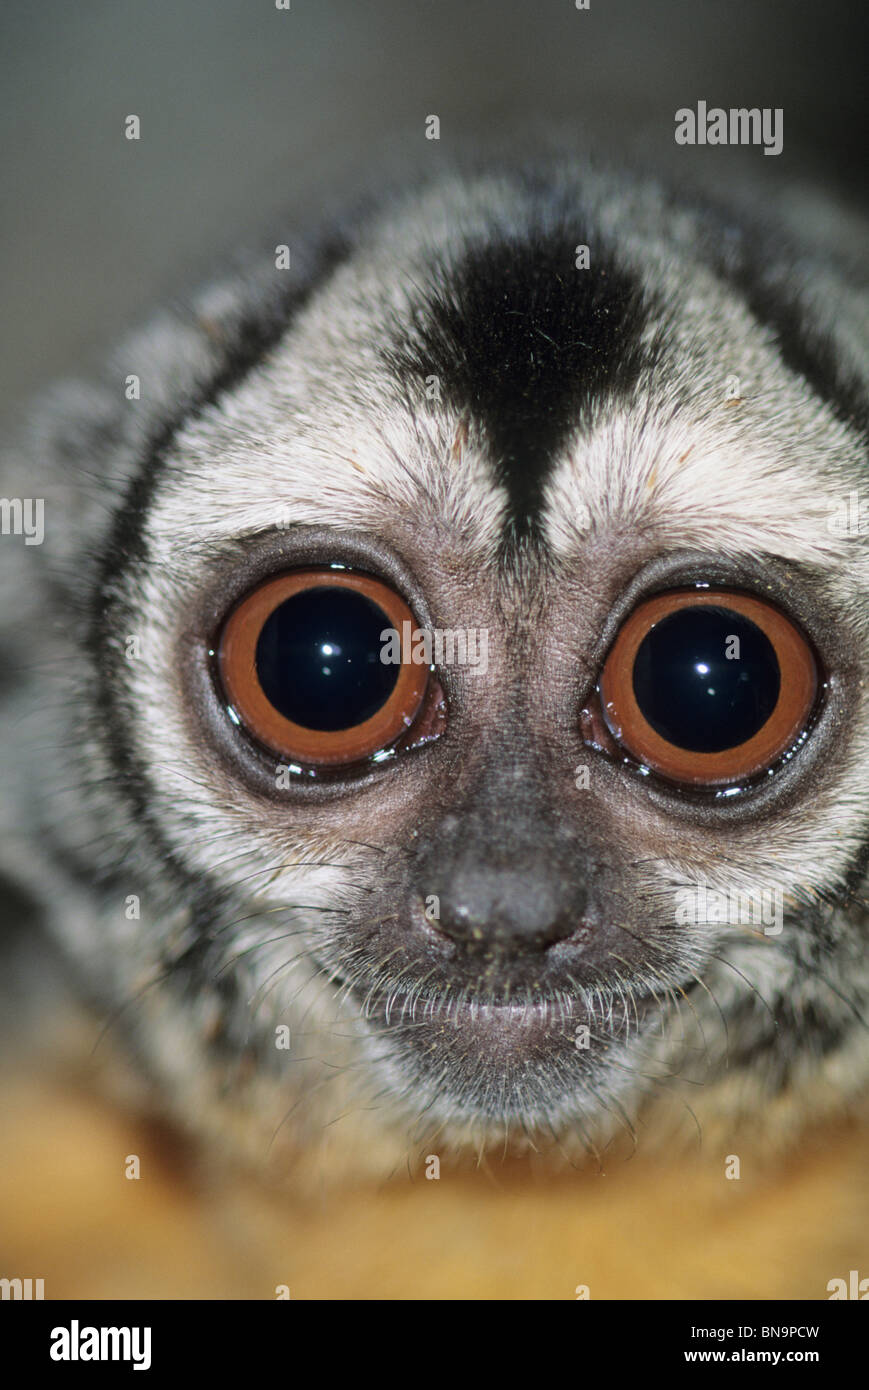 Night or Owl Monkey, (Aotus species),Captive portrait of nocturnal primate Stock Photo